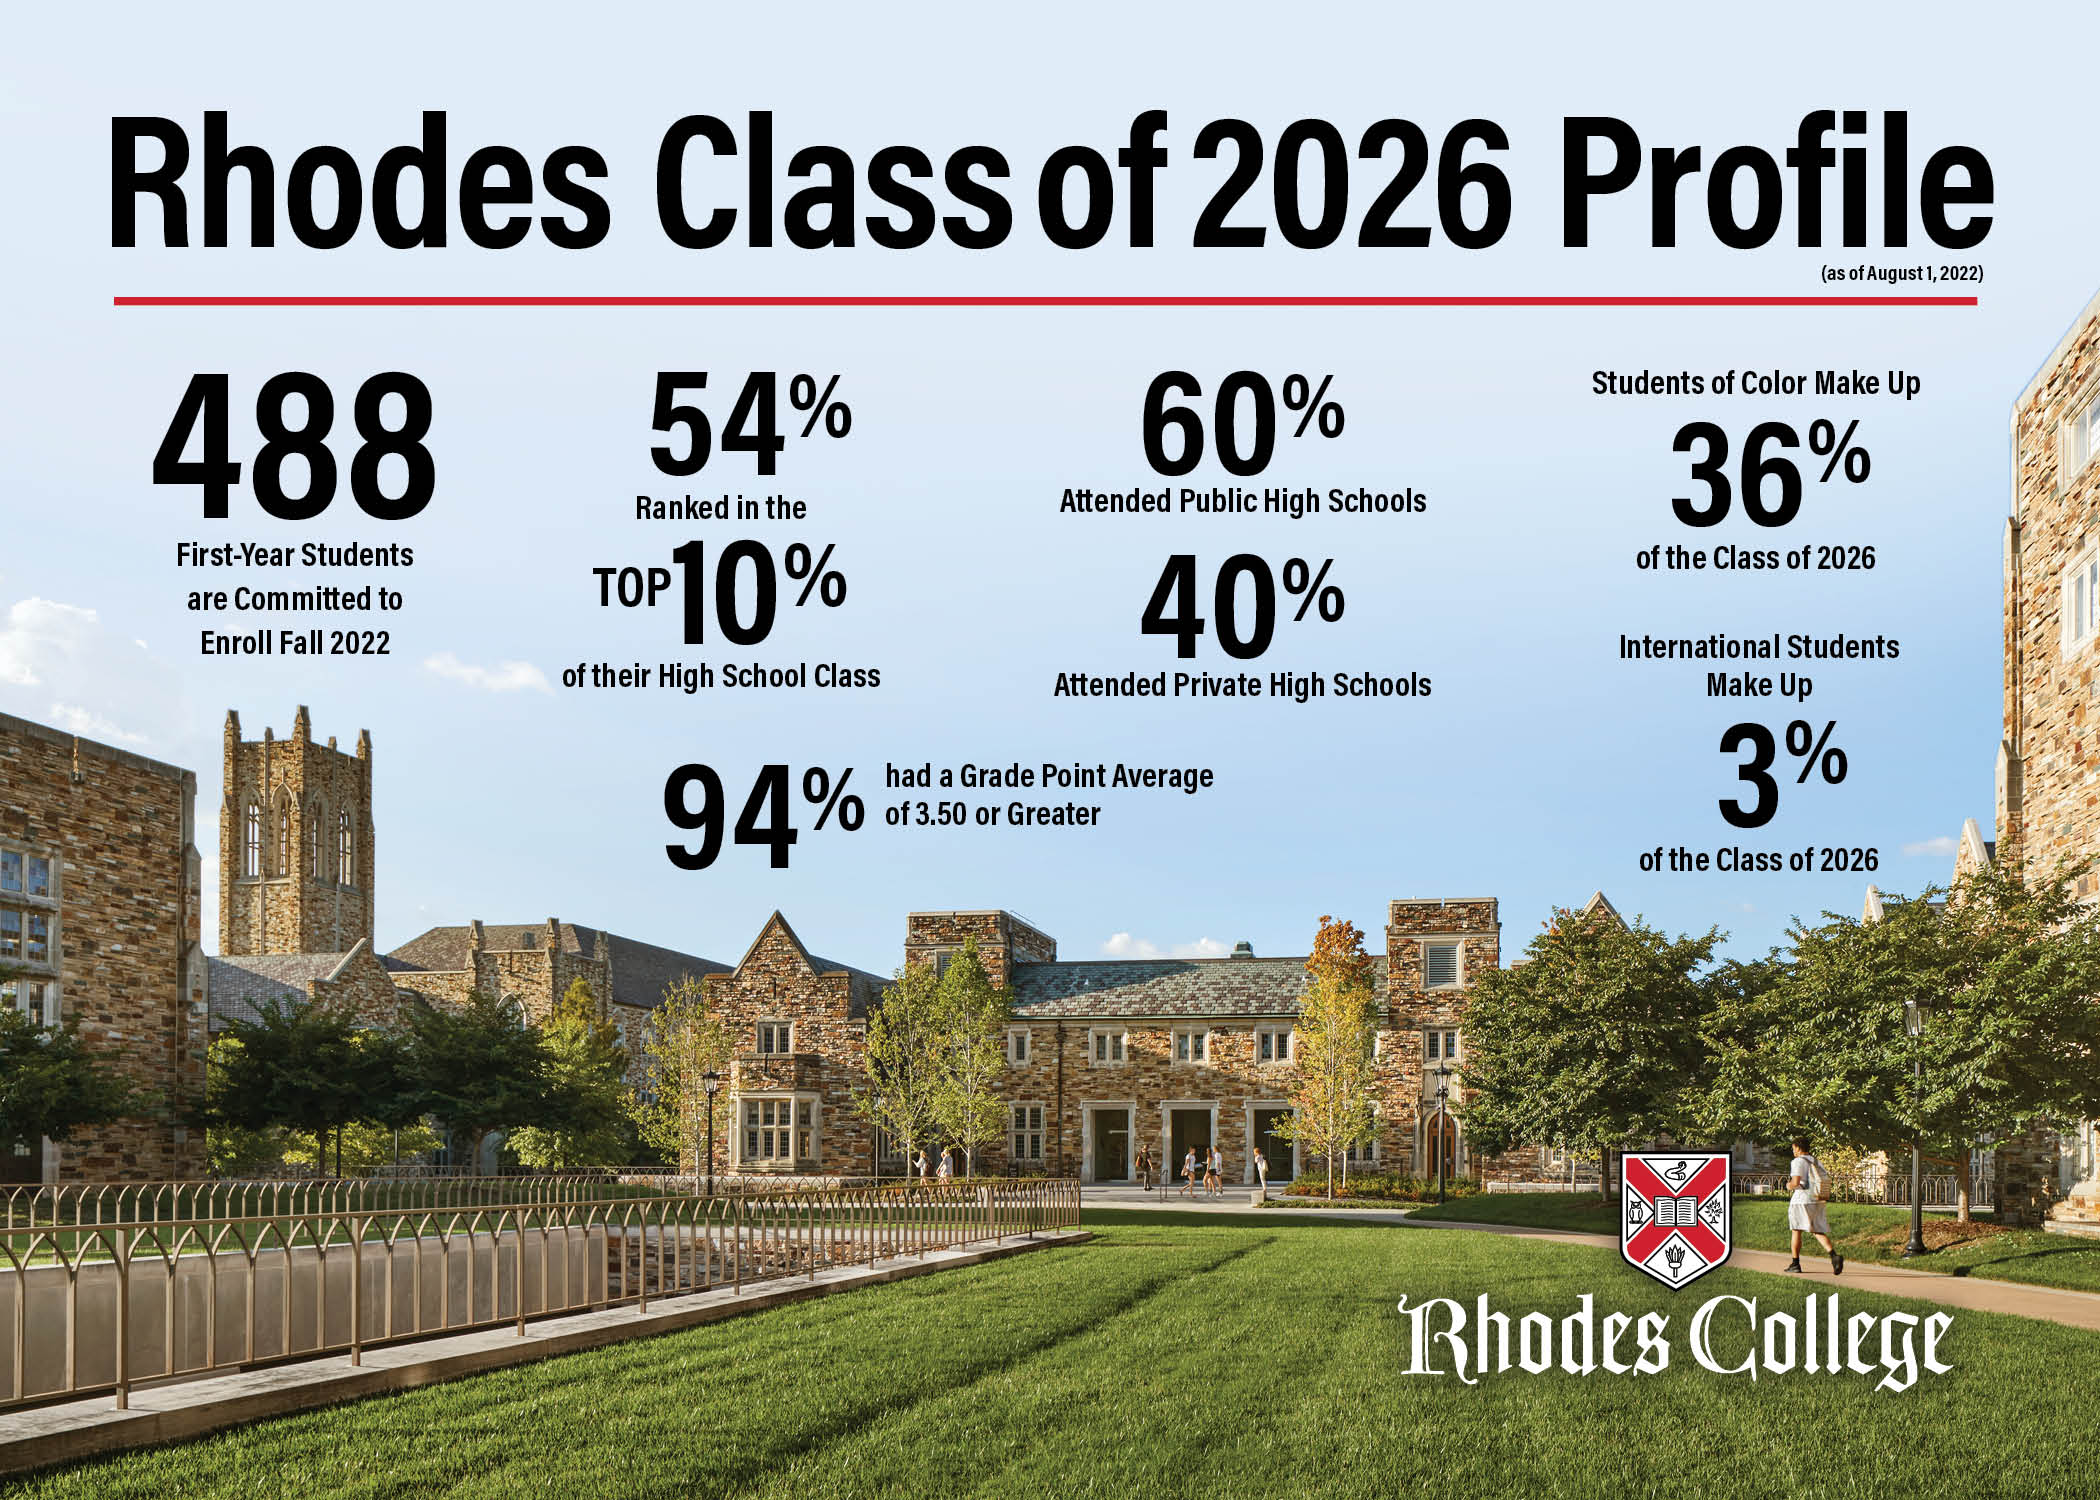 rhodes-college-gears-up-for-new-class-associated-colleges-of-the-south